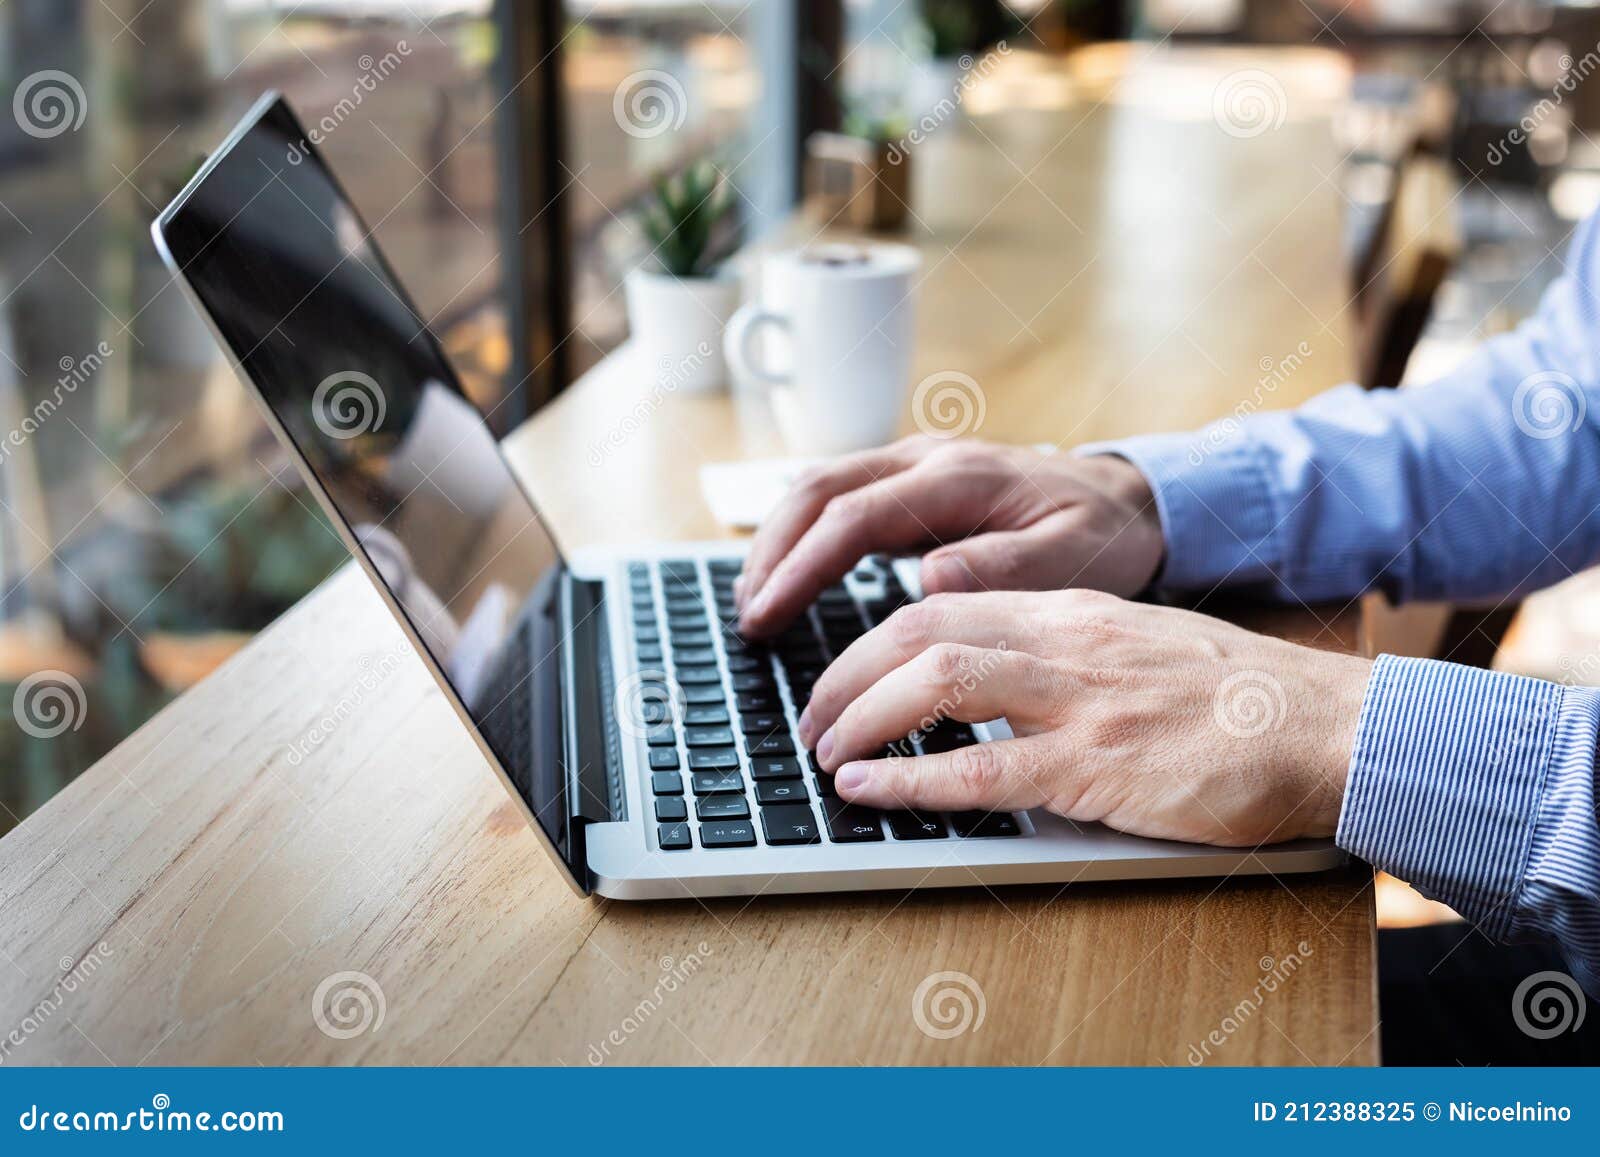 hands typing on laptop computer keyboard, person writing email or report document in cafe with coffee and wifi internet, casual